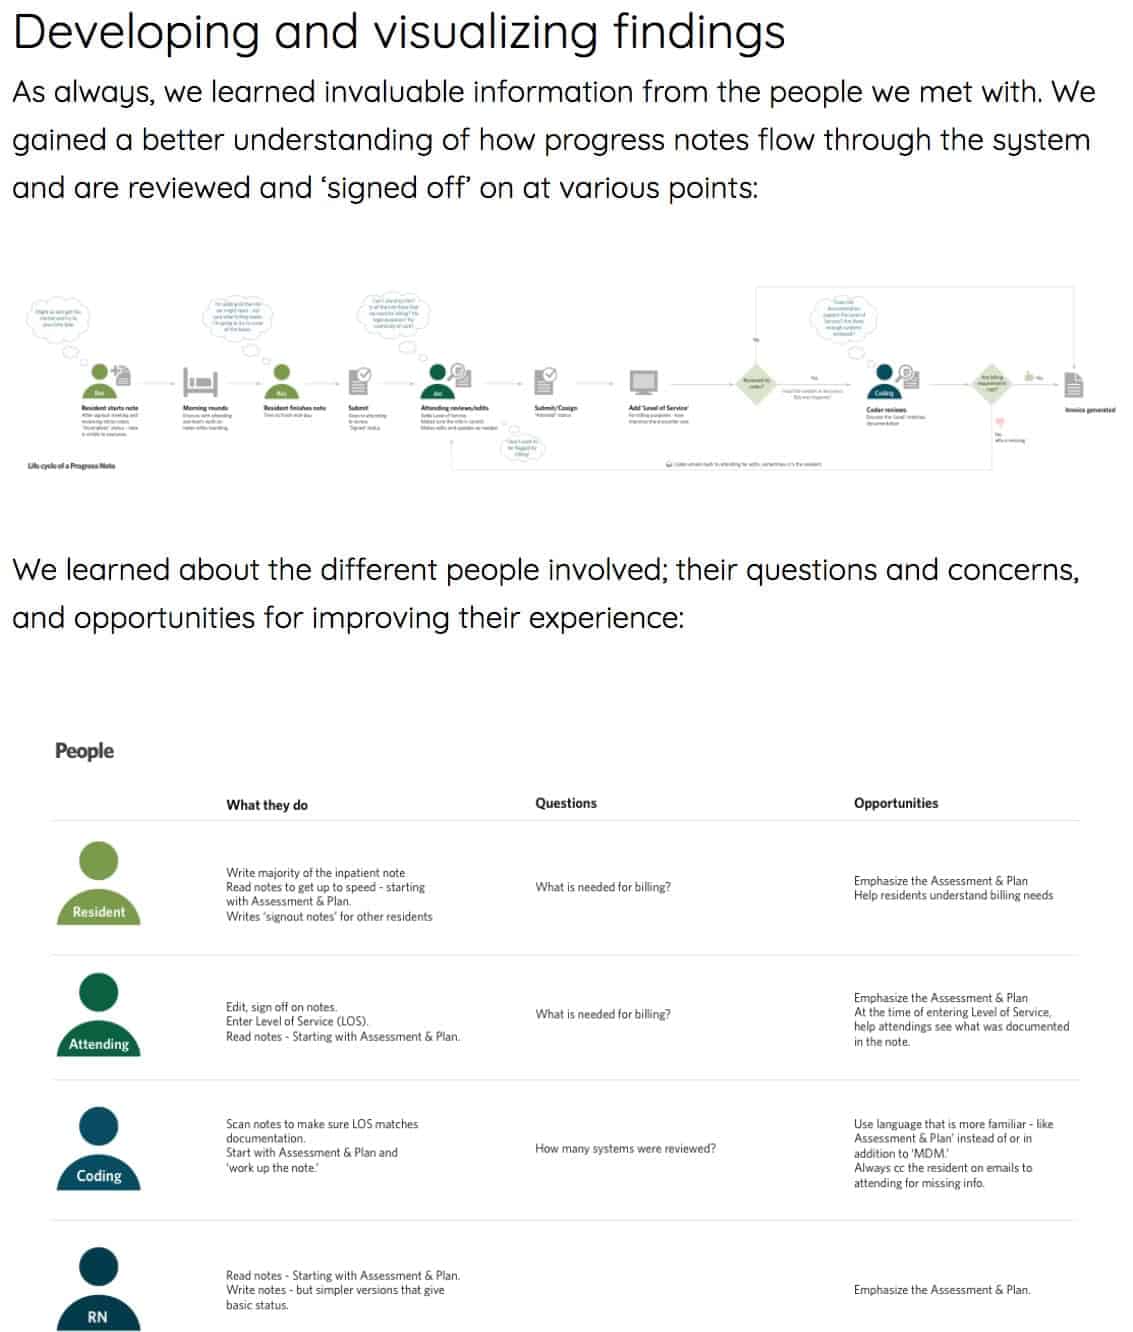 Image from Katie’s portfolio on visualizing findings from the various roles in the hospital that write progress notes